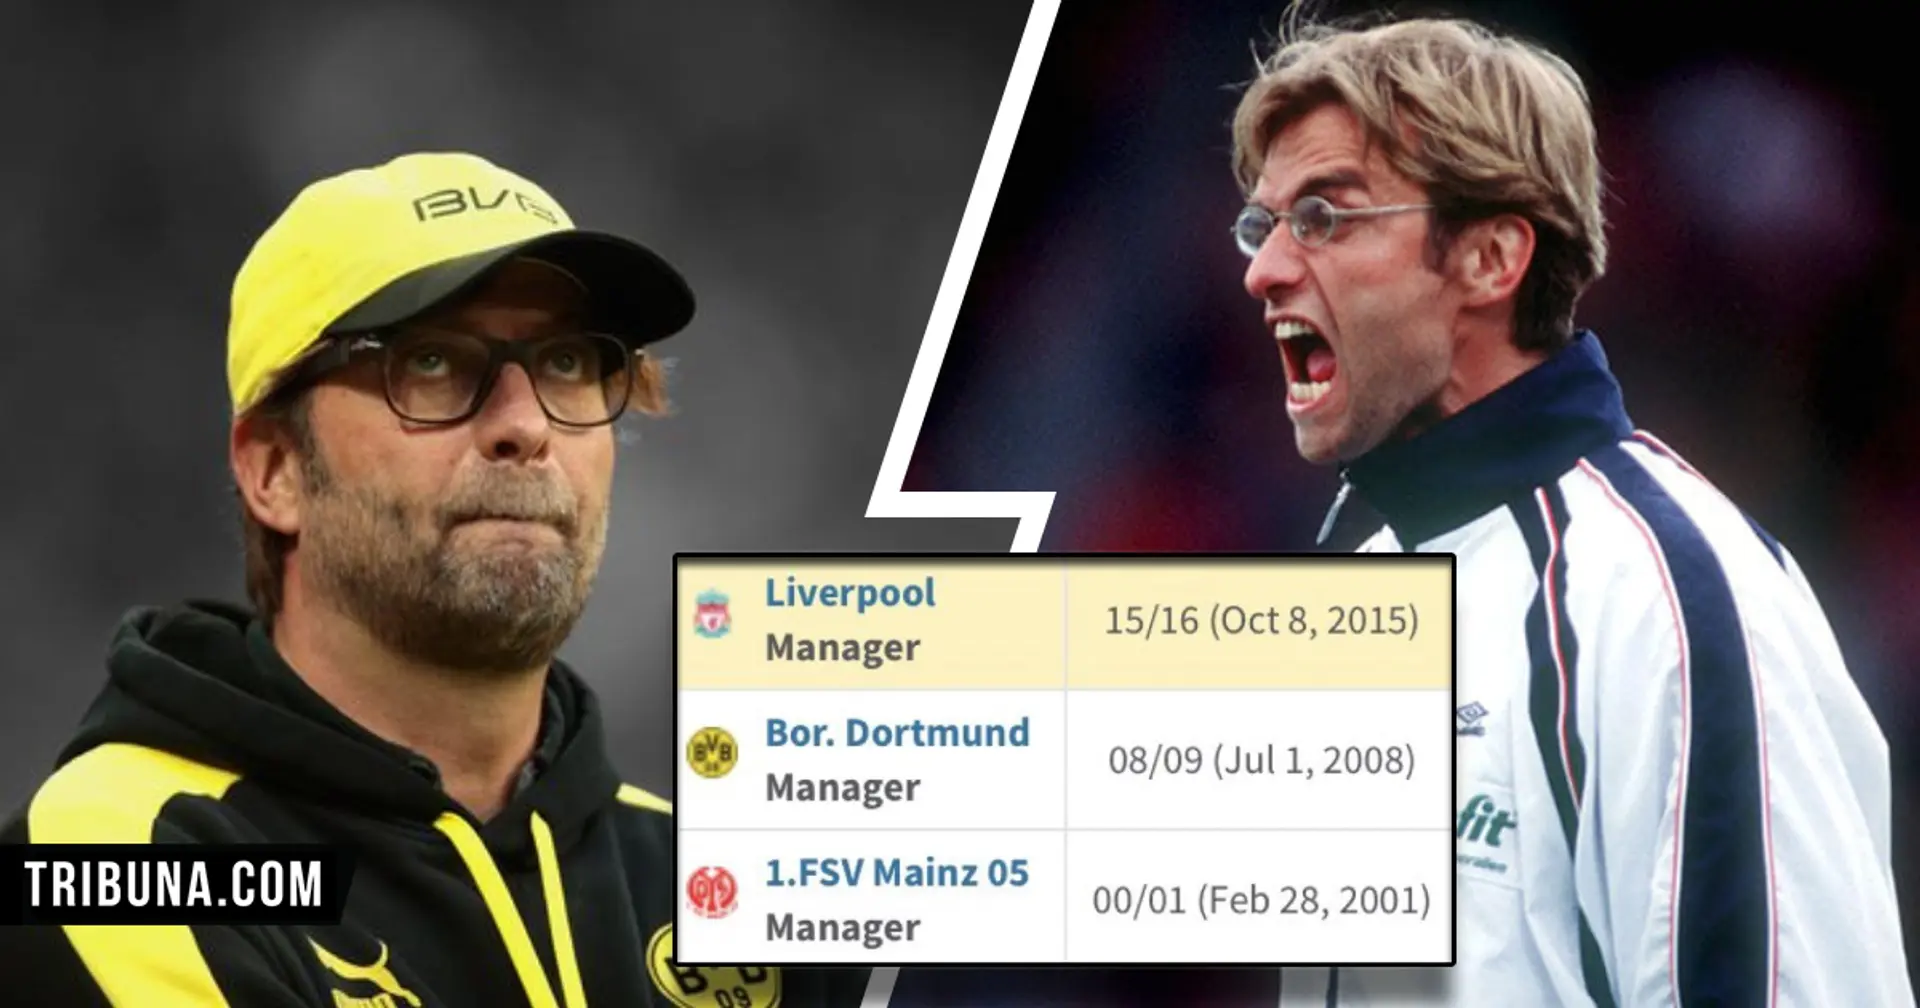 Fans suggest Jurgen Klopp has a 'curse' and it was bound to hit Liverpool exactly this season